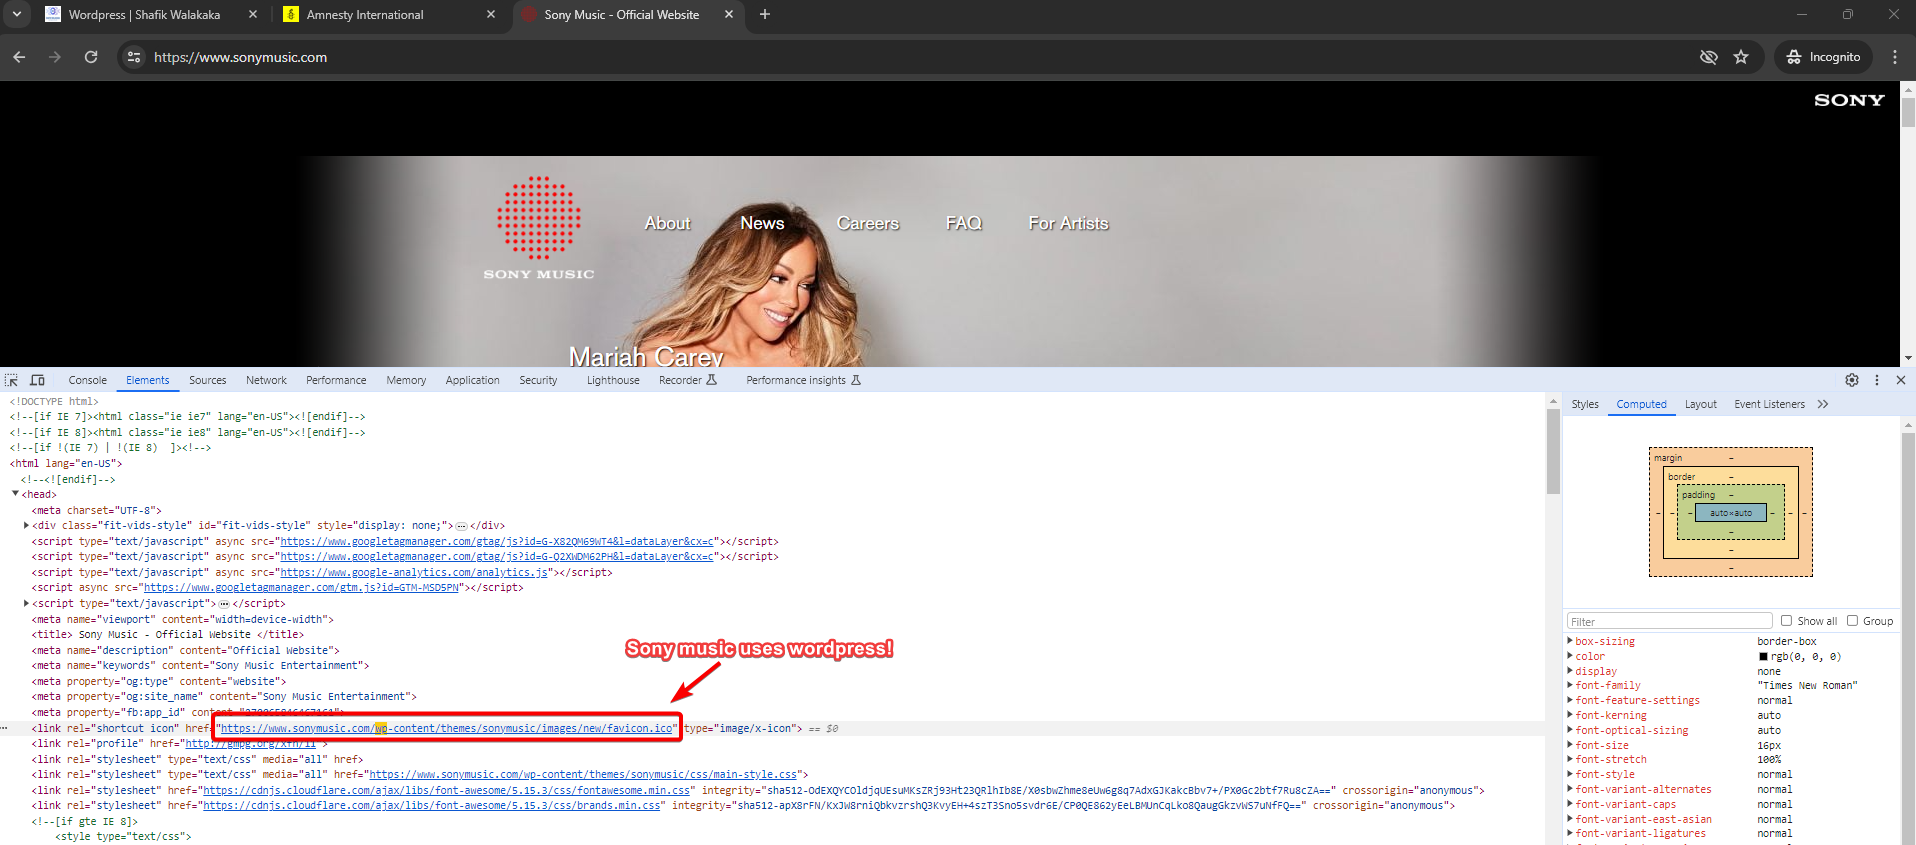 image showing that Sony Music uses wordpress